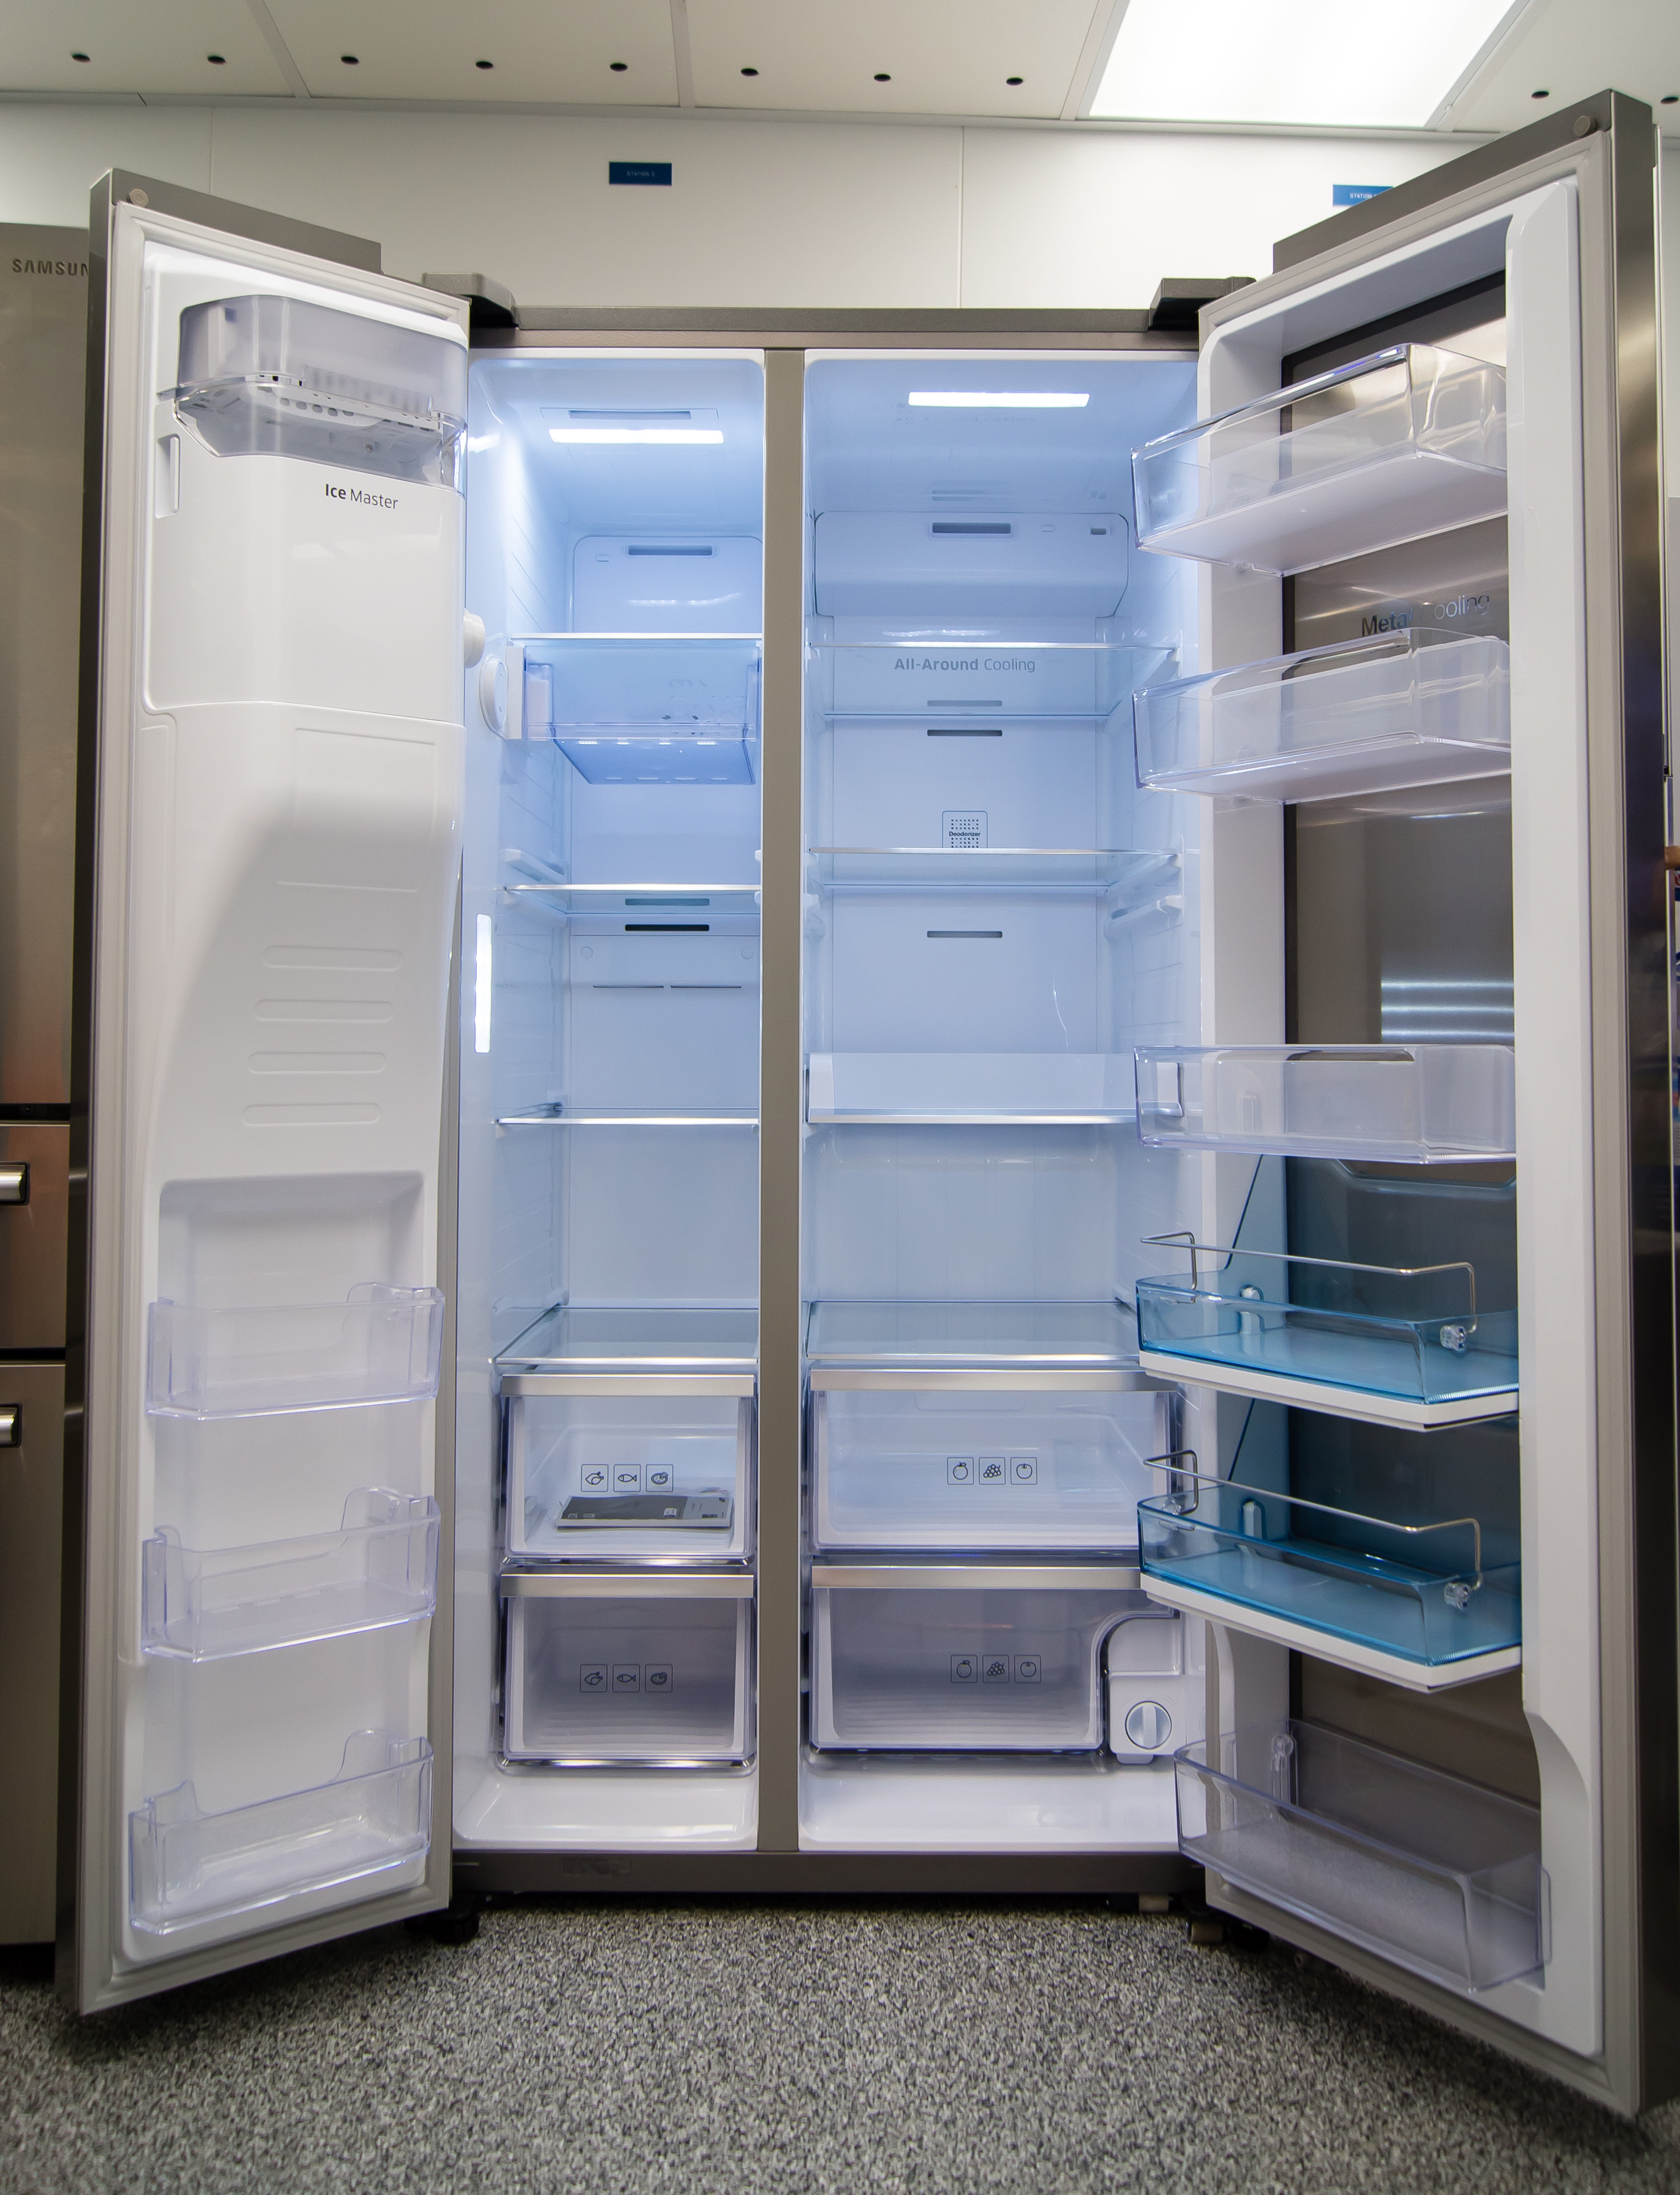 What are some benefits of a side-by-side refrigerator comparison?